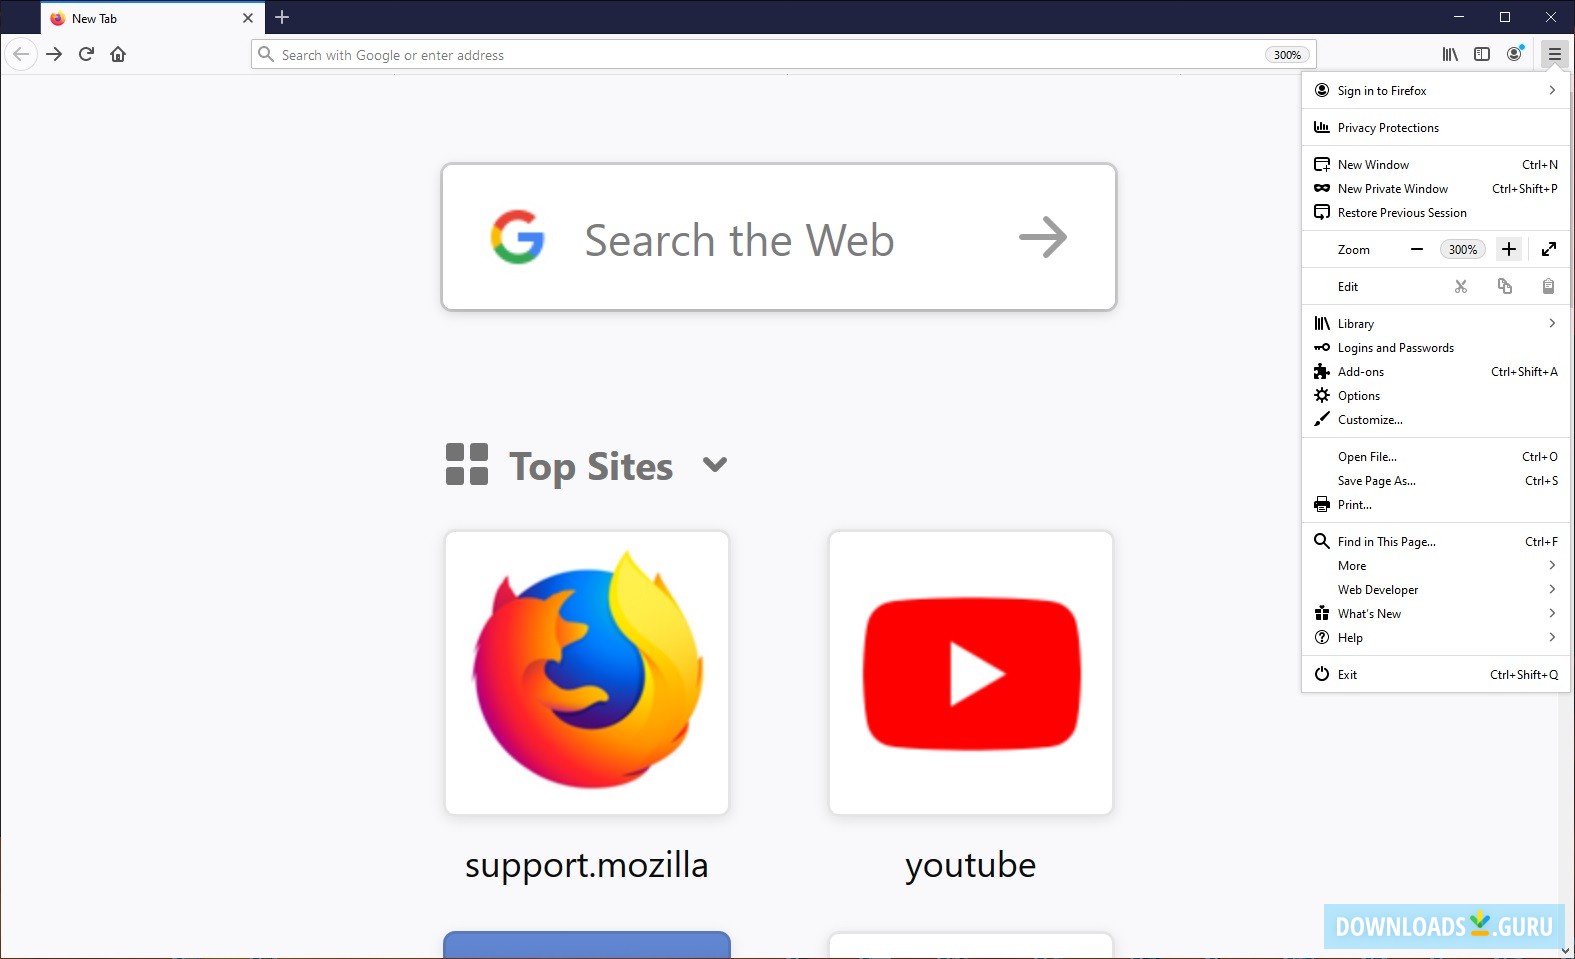 firefox download for windows 7